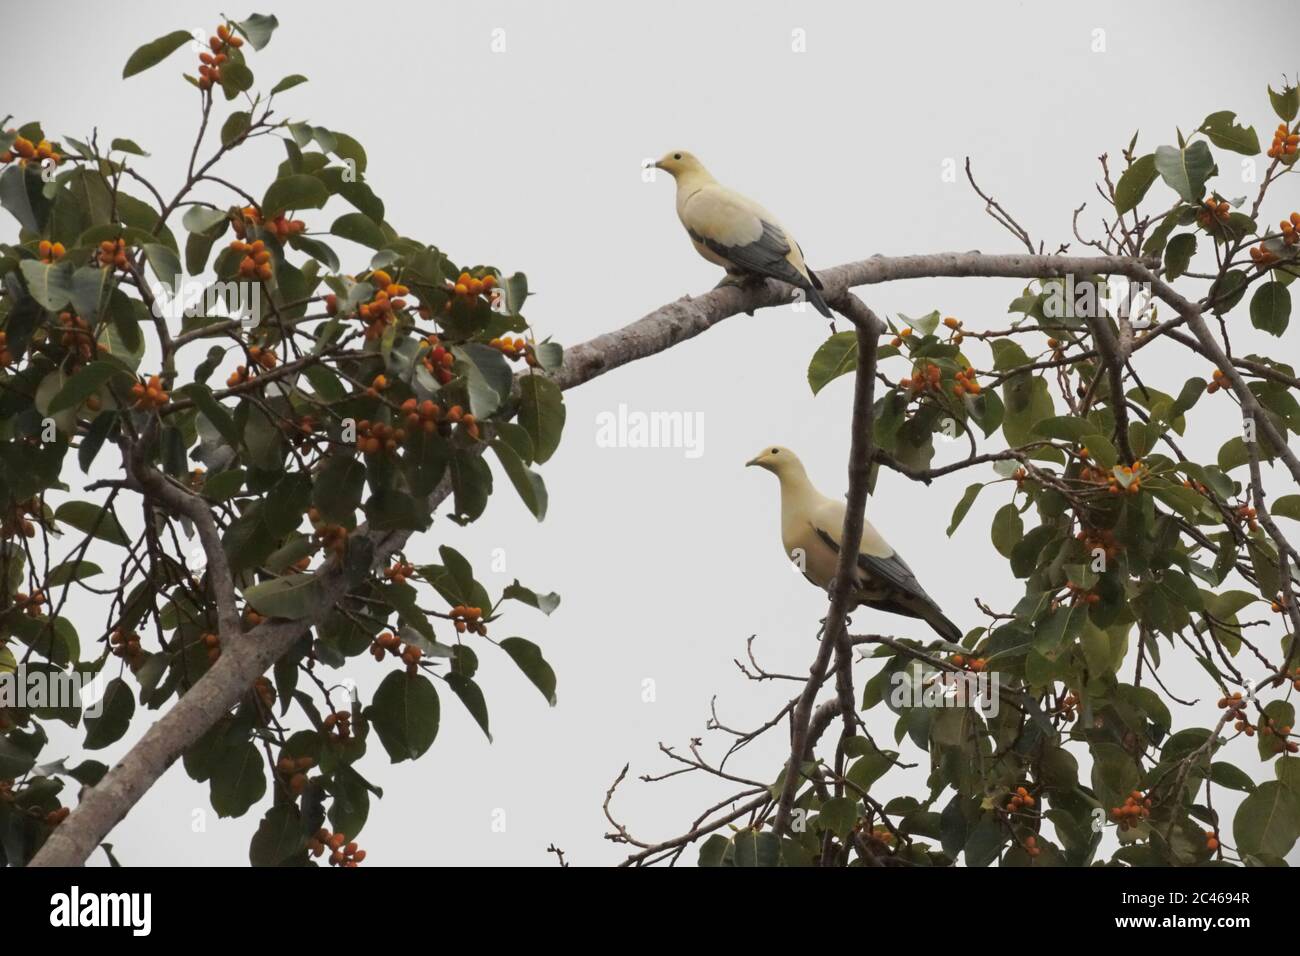 Two individuals of unidentified species of pigeon perching on a tree. Stock Photo